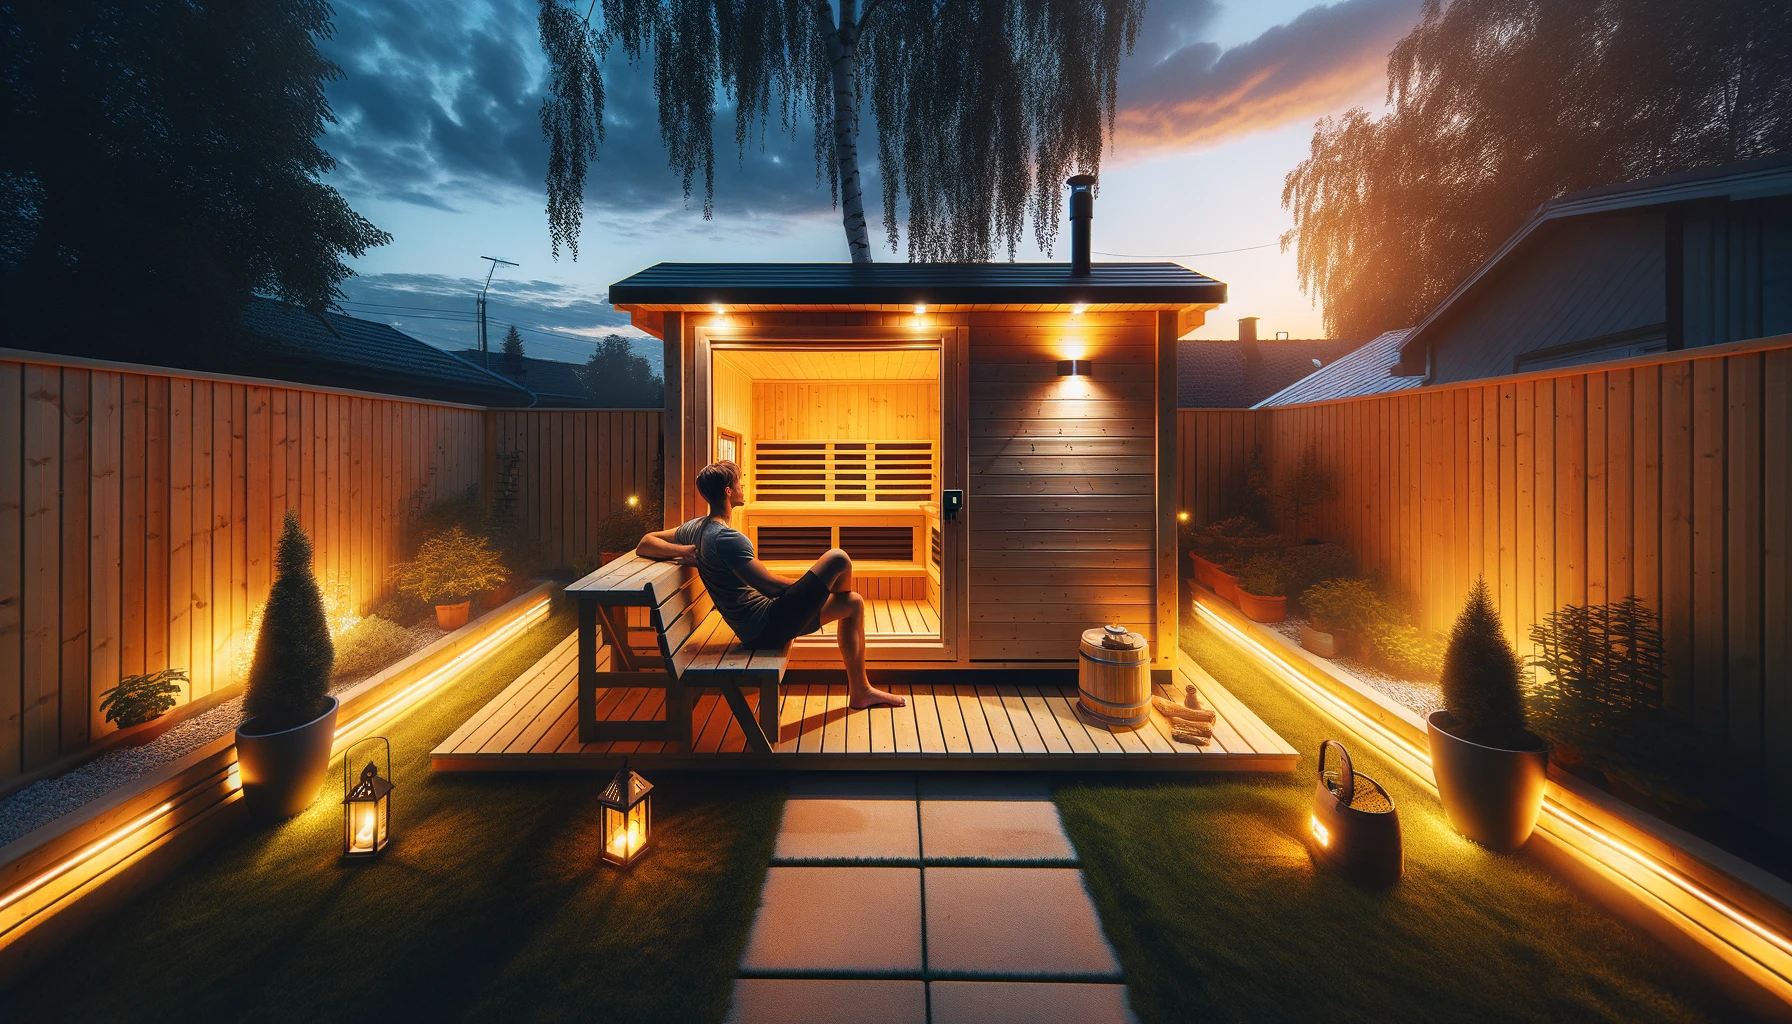 Person relaxing in backyard sauna at twilight